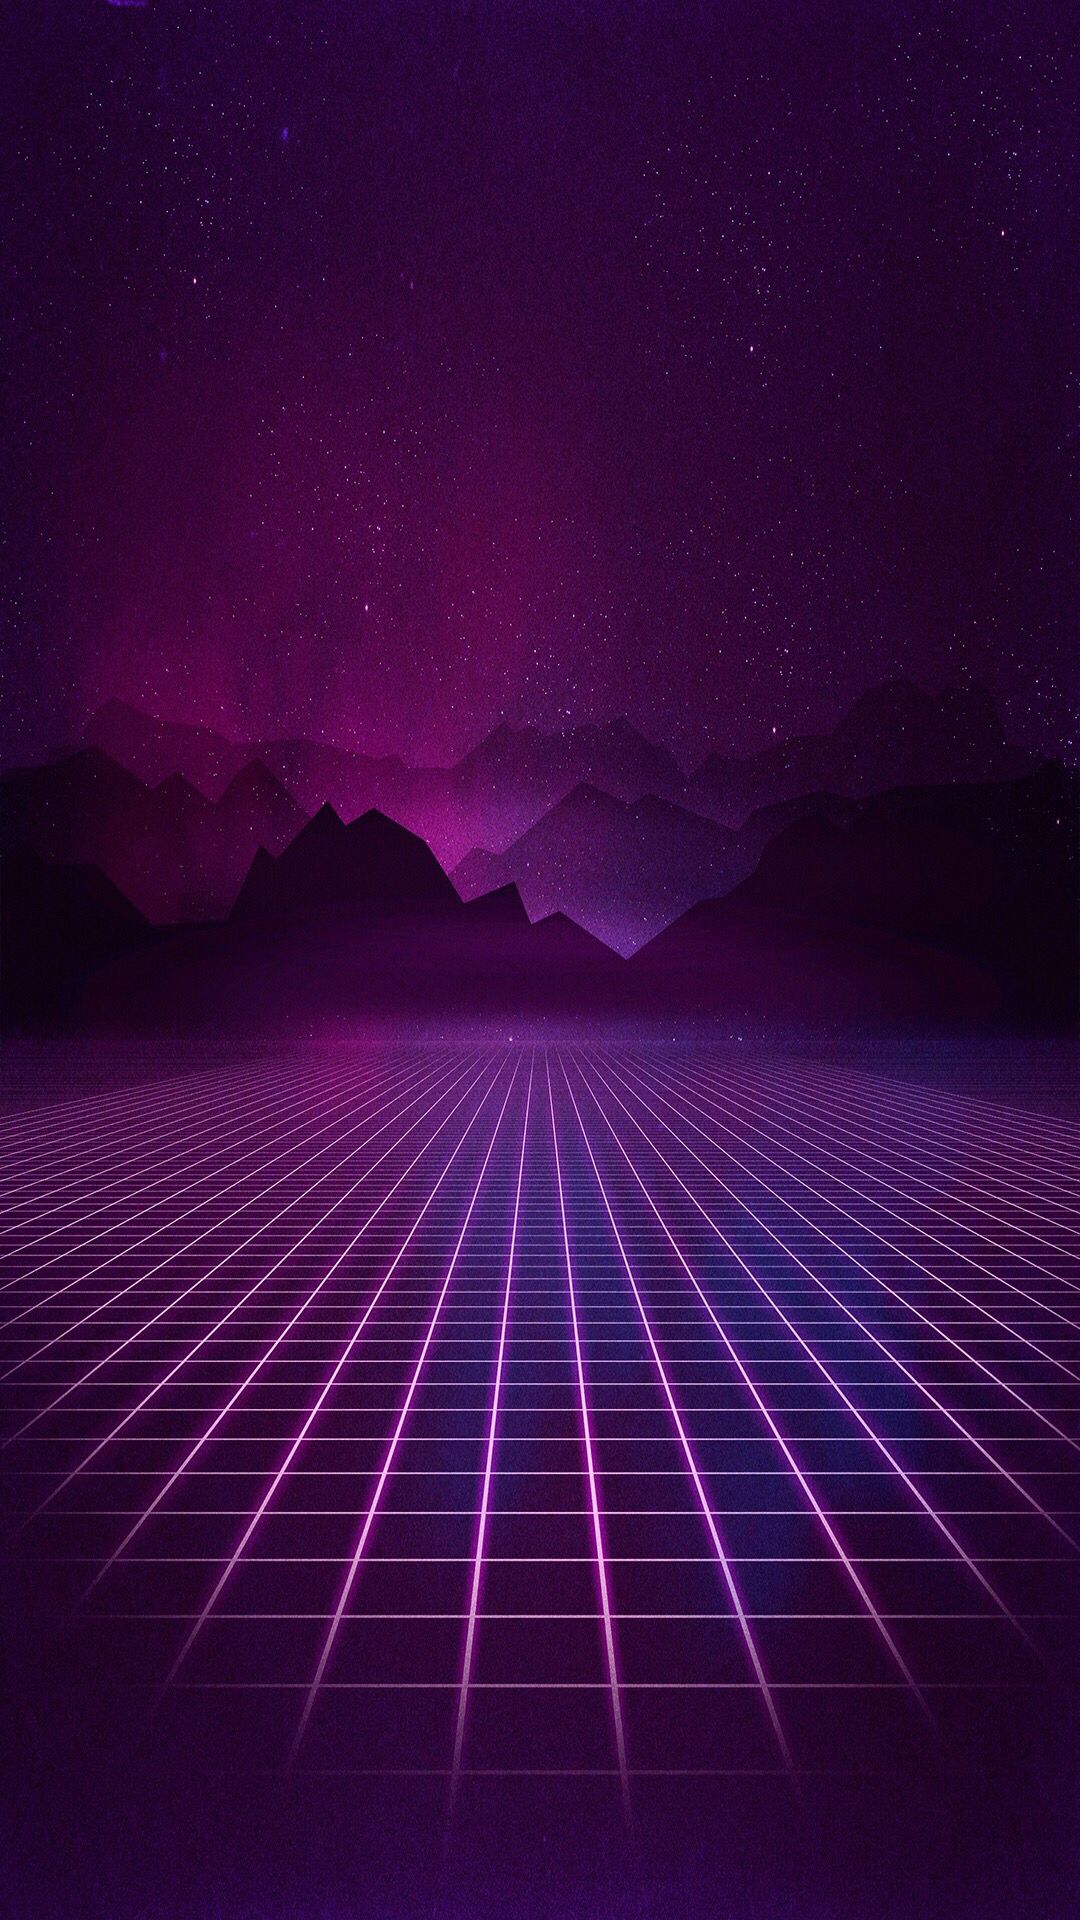 Aesthetic neon purple grid wallpaper with mountains in the background - Dark vaporwave